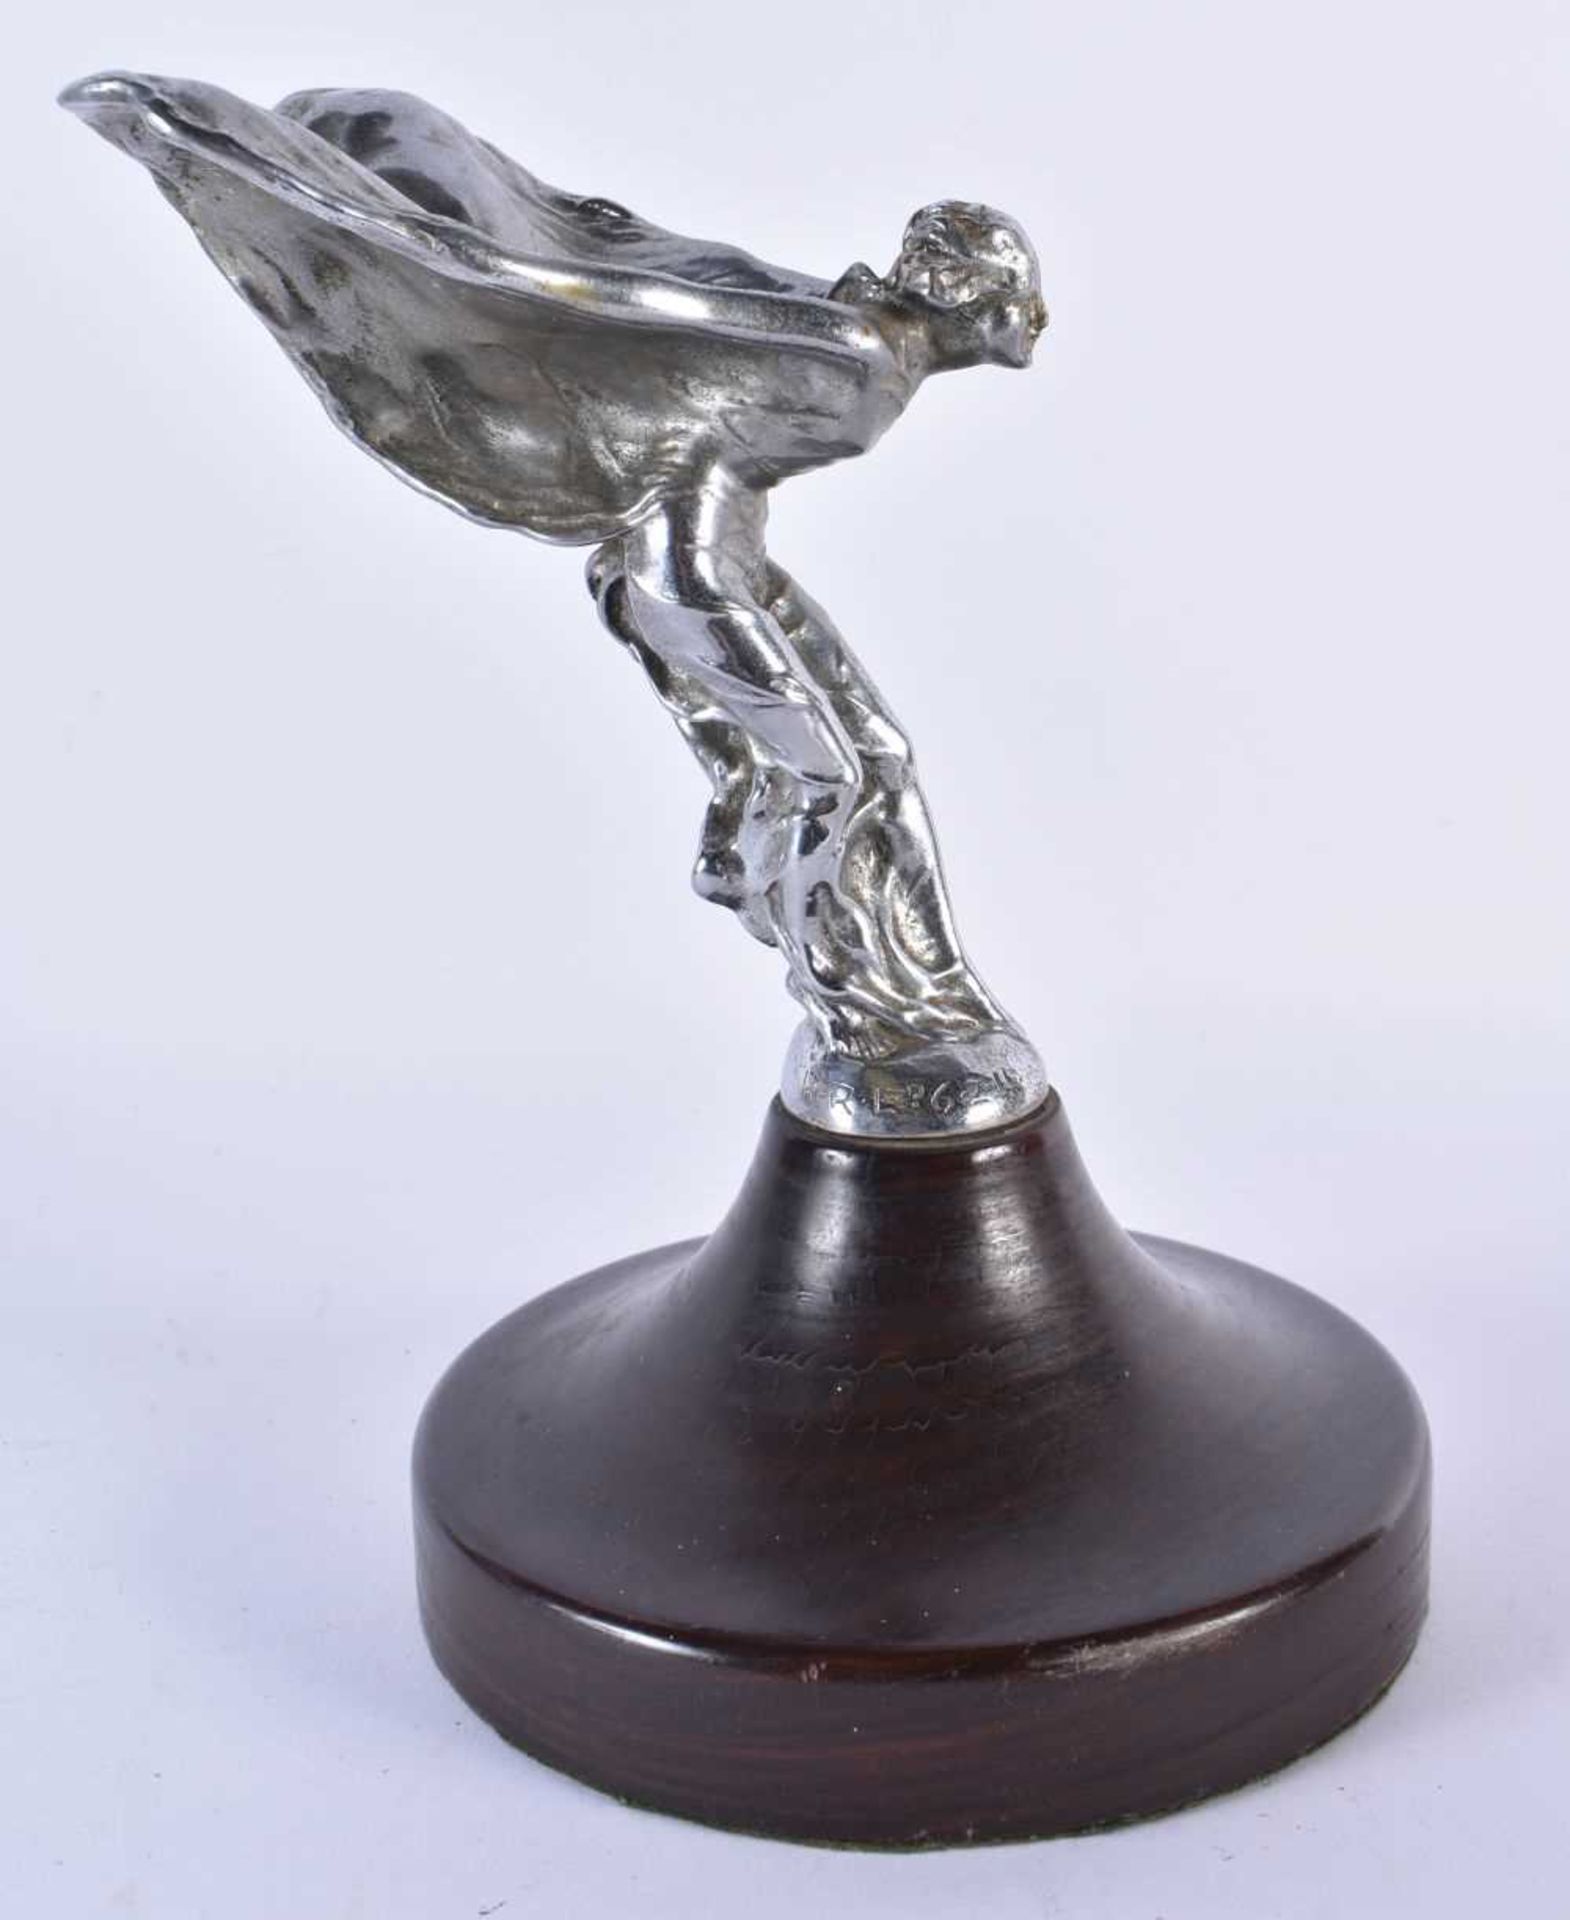 AN ANTIQUE CHARLES SYKES SPIRIT OF ECSTASY SILVER PLATED CAR MASCOT. 23 cm high.